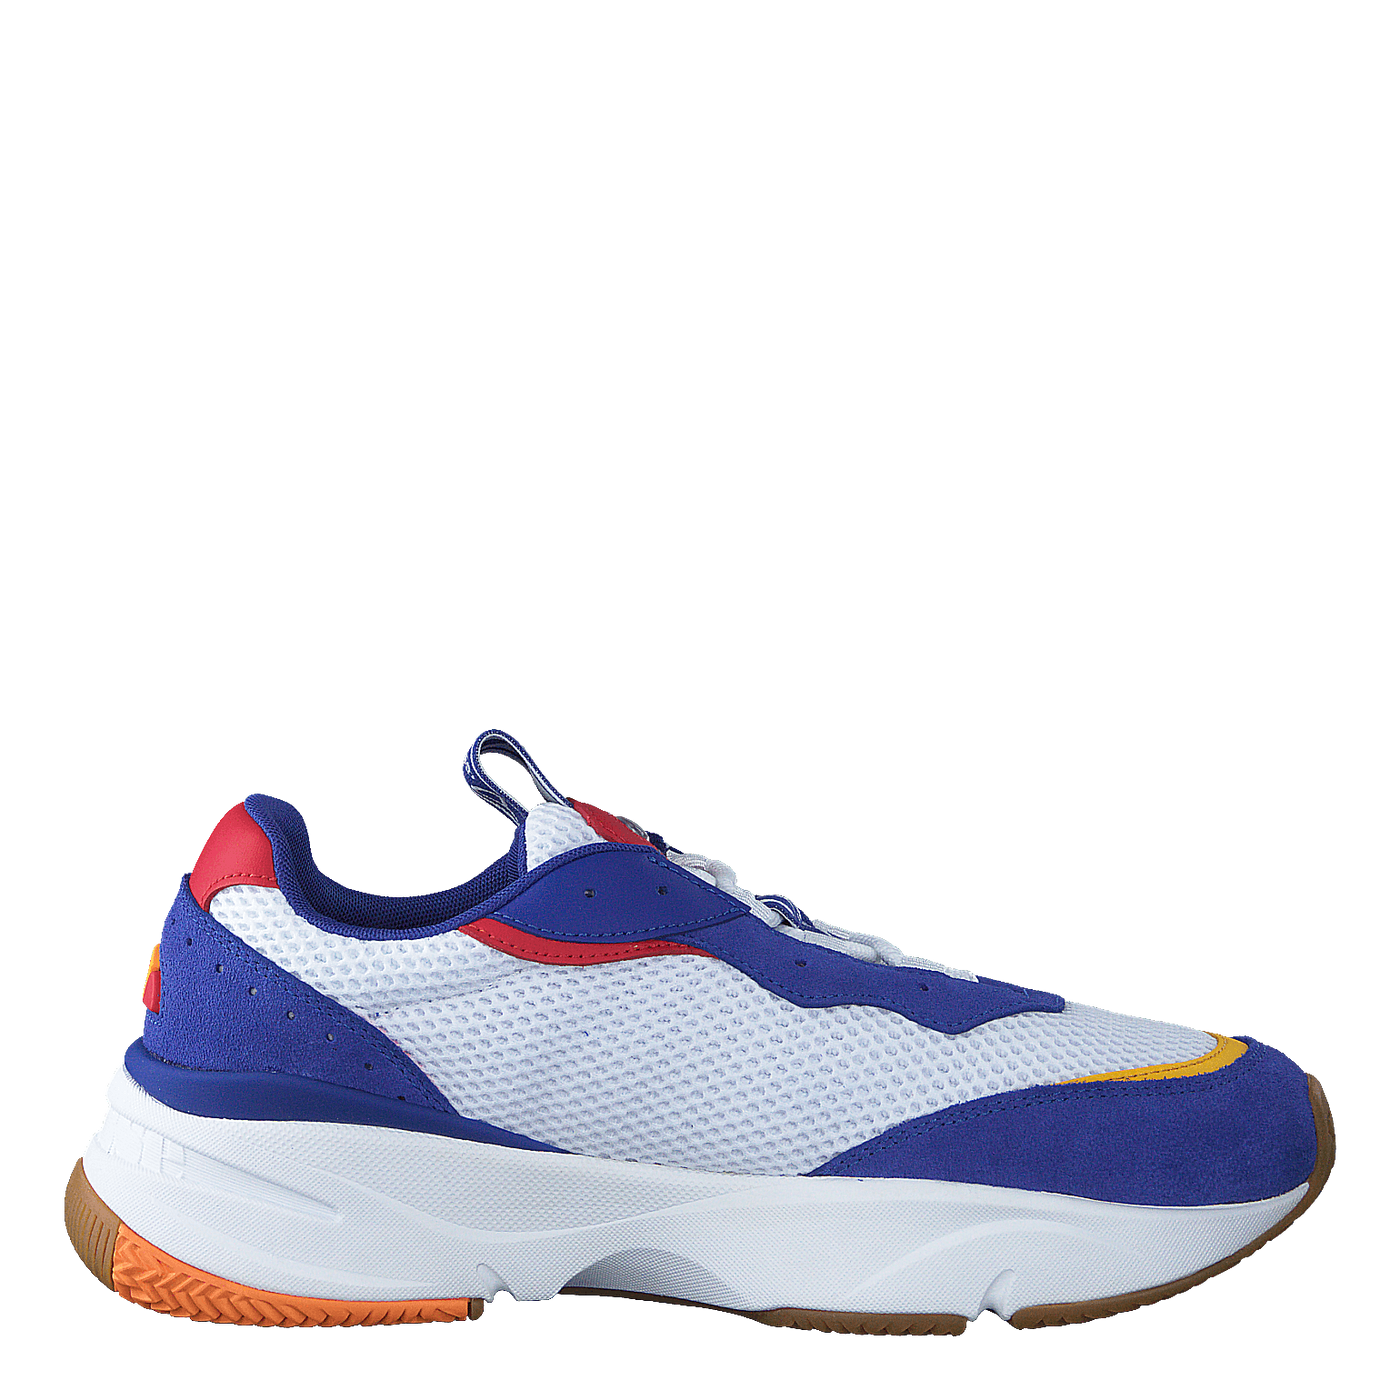 Ellesse 610245 Massello Text Am Trainers, 47% OFF